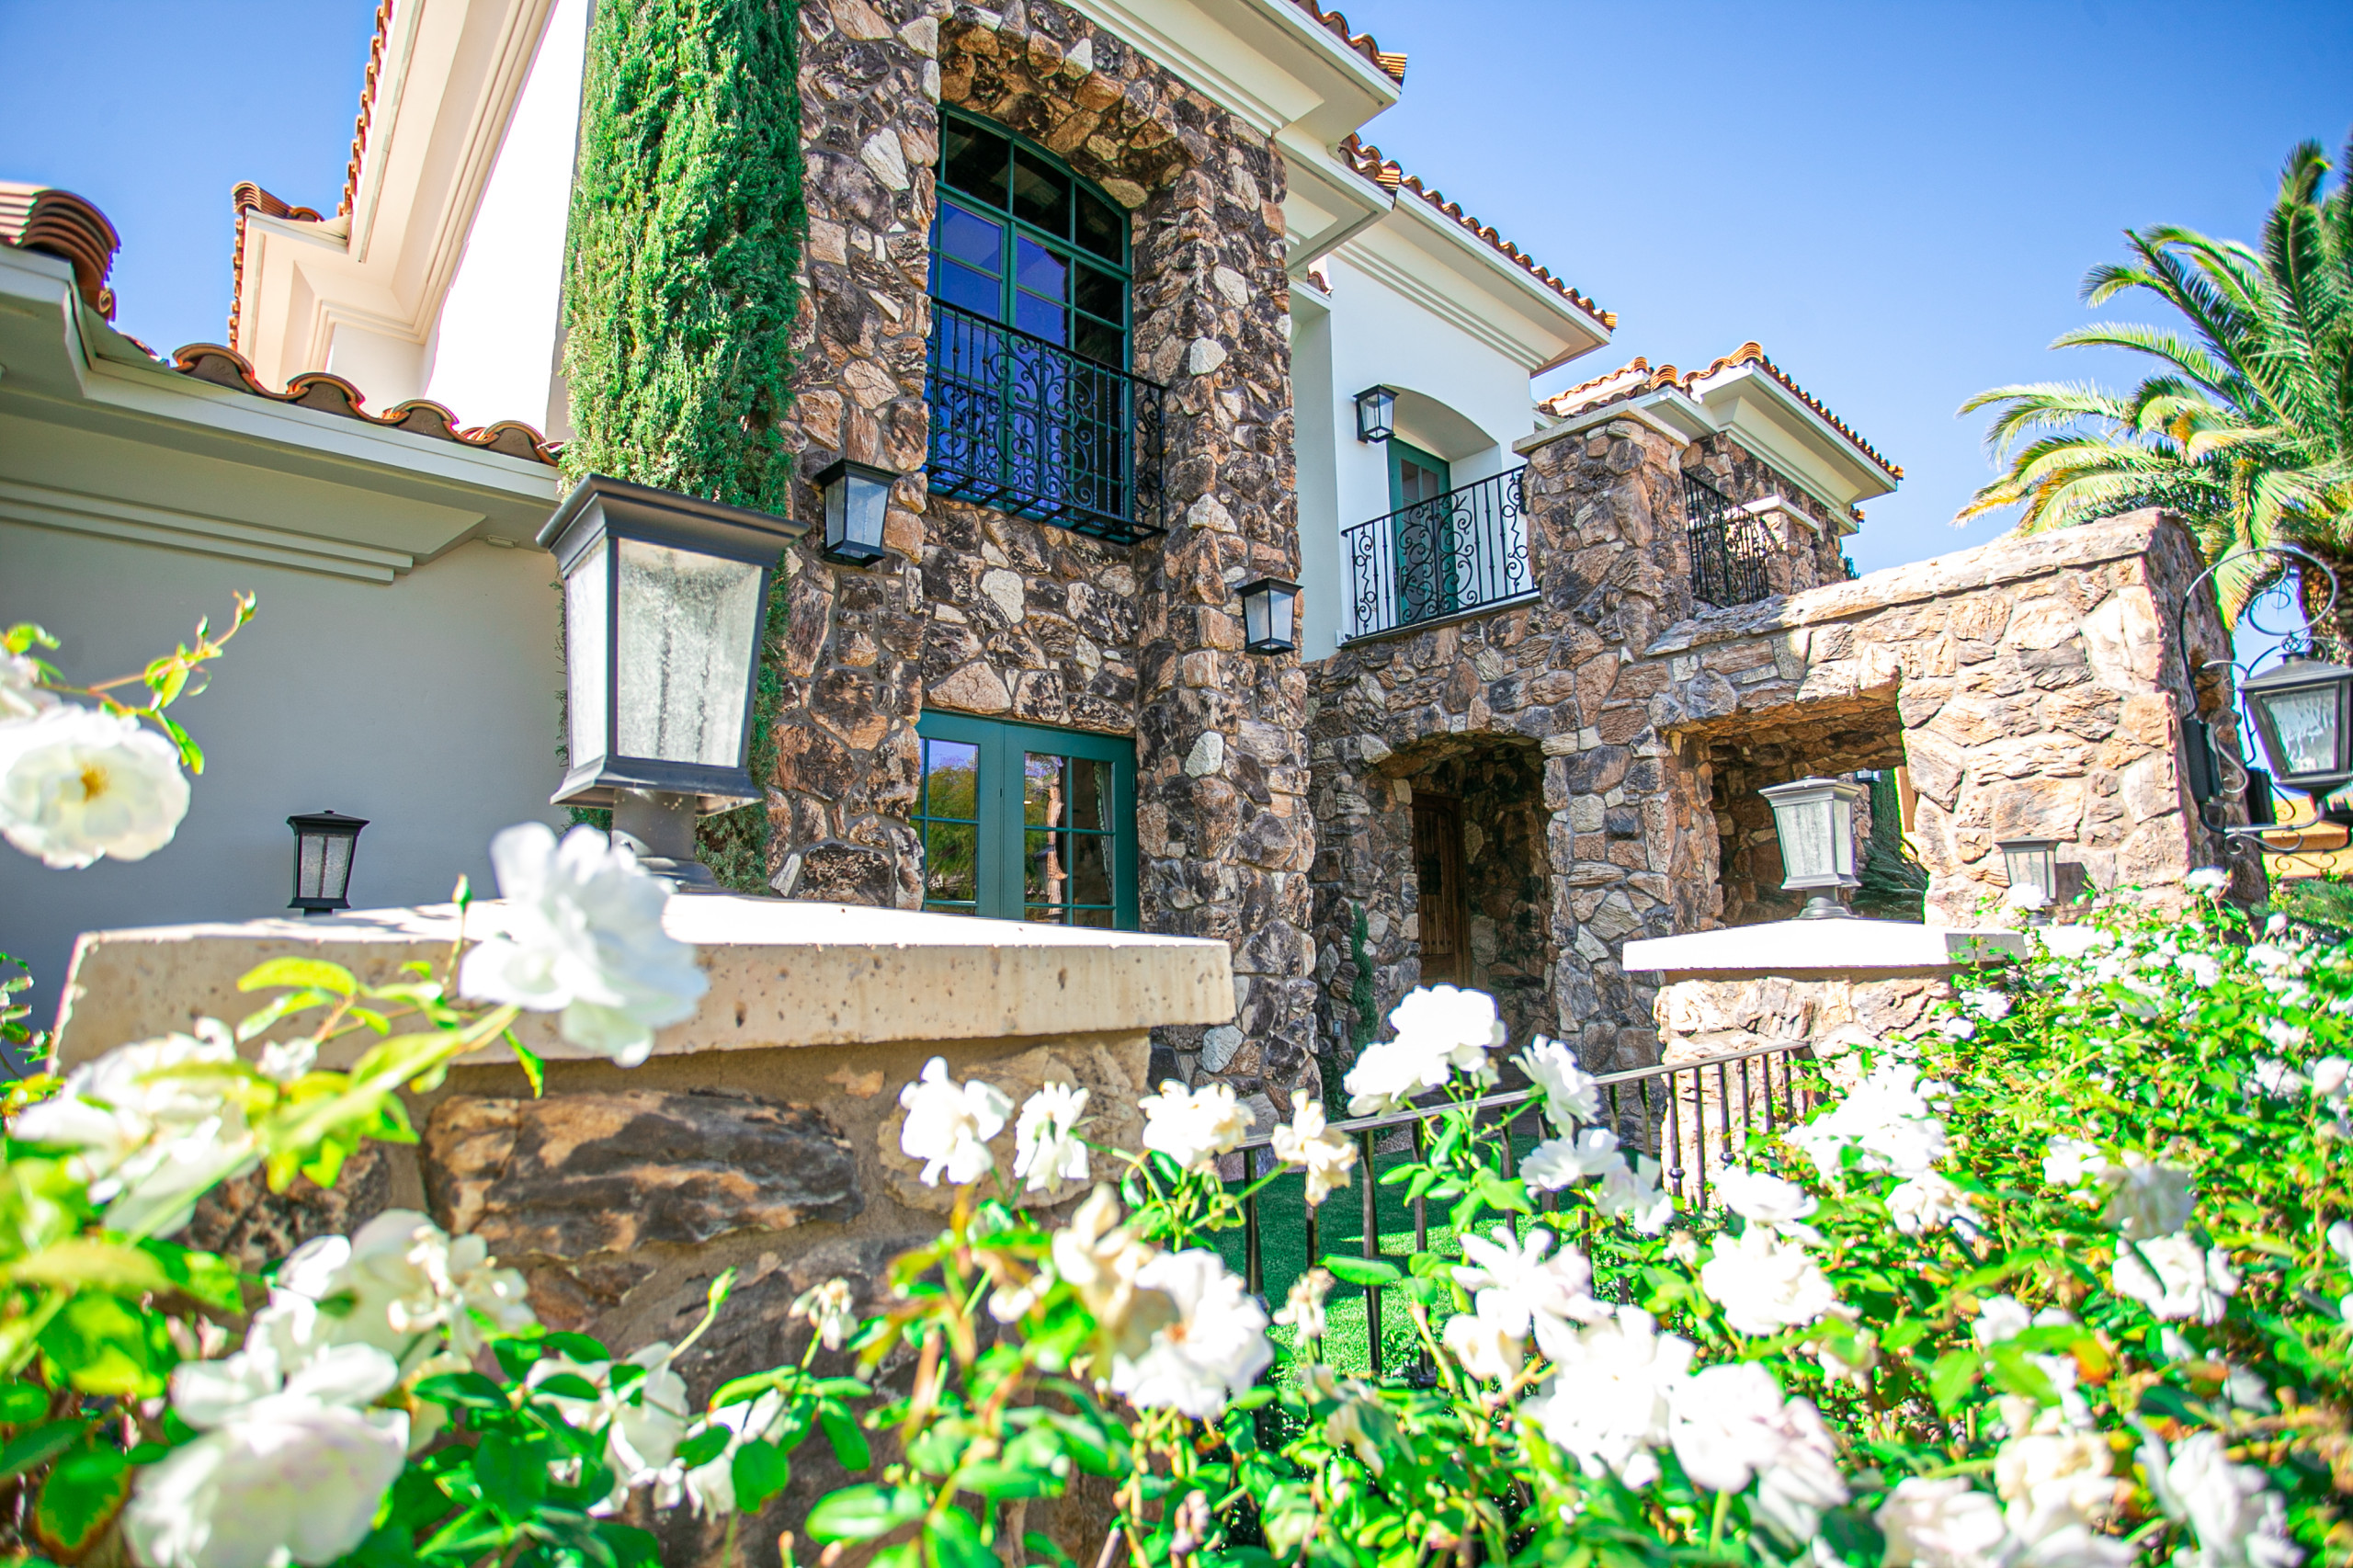 This contemporary home remodel in Summerlin, NV was so fun for the MFD Team! Bringing the Mediterranean style to the desert, this exterior focuses on lush greenery and stone accents.